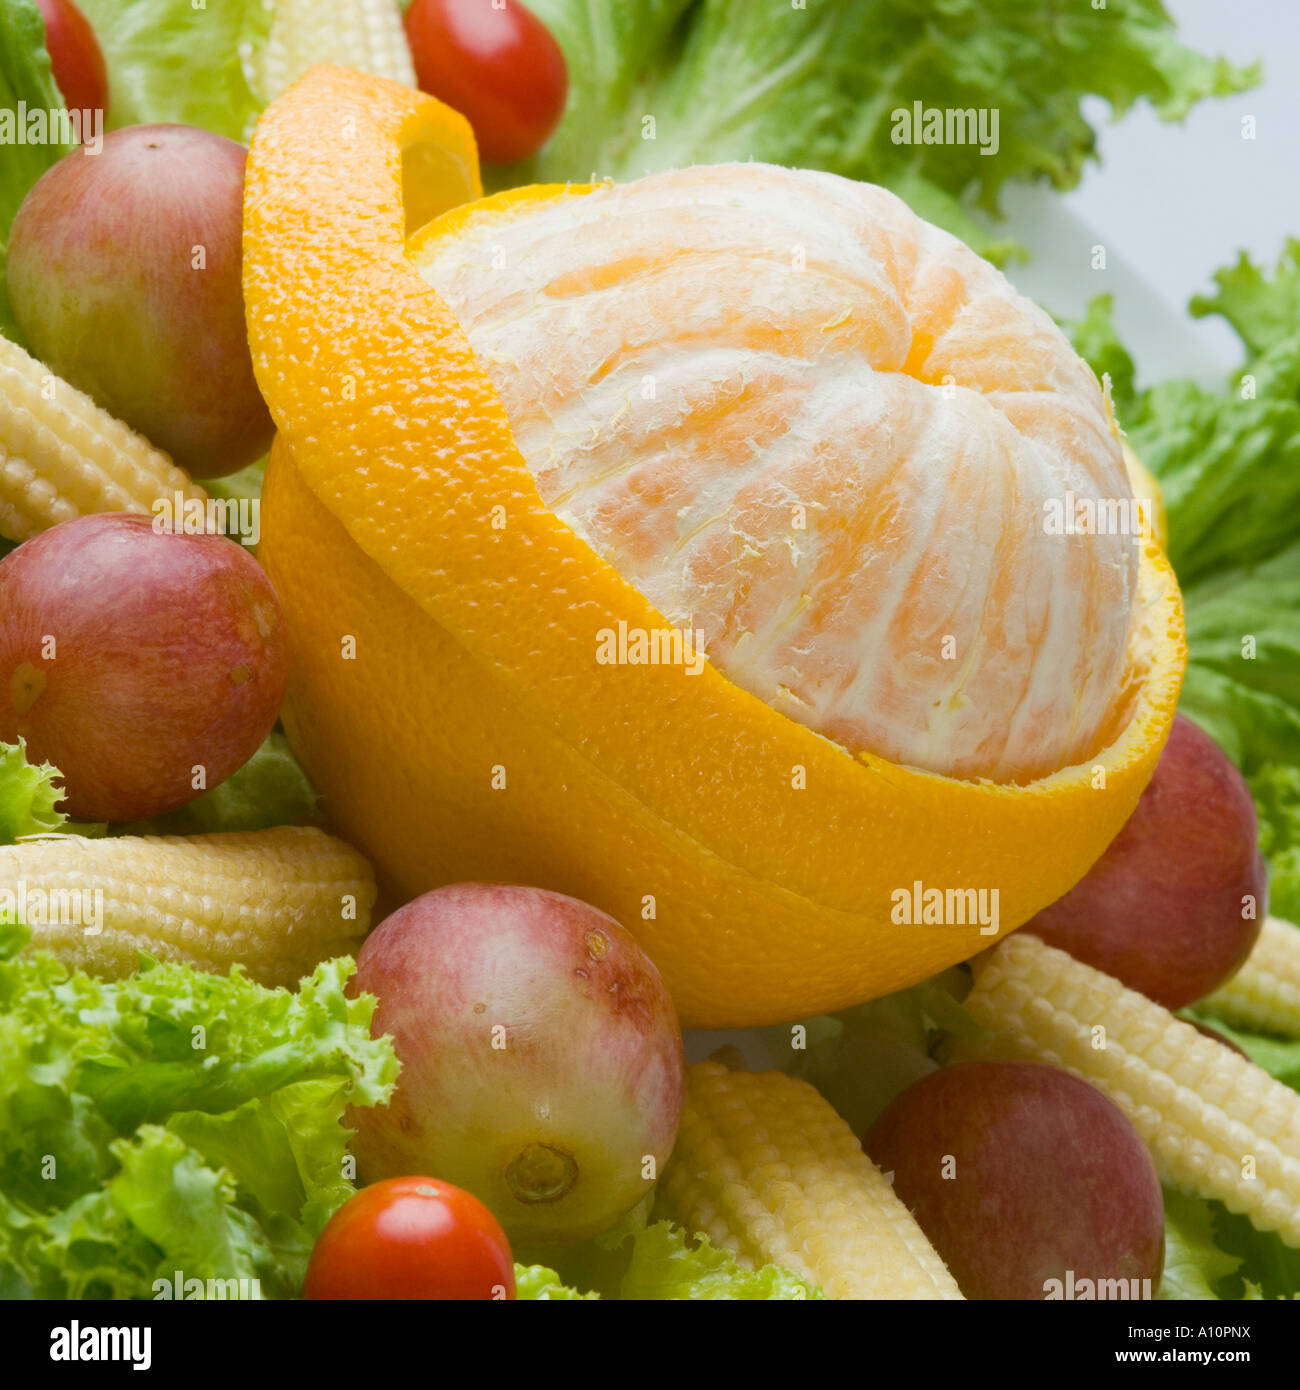 Close-up of a peeled orange with baby corns and cherry tomatoes Stock Photo